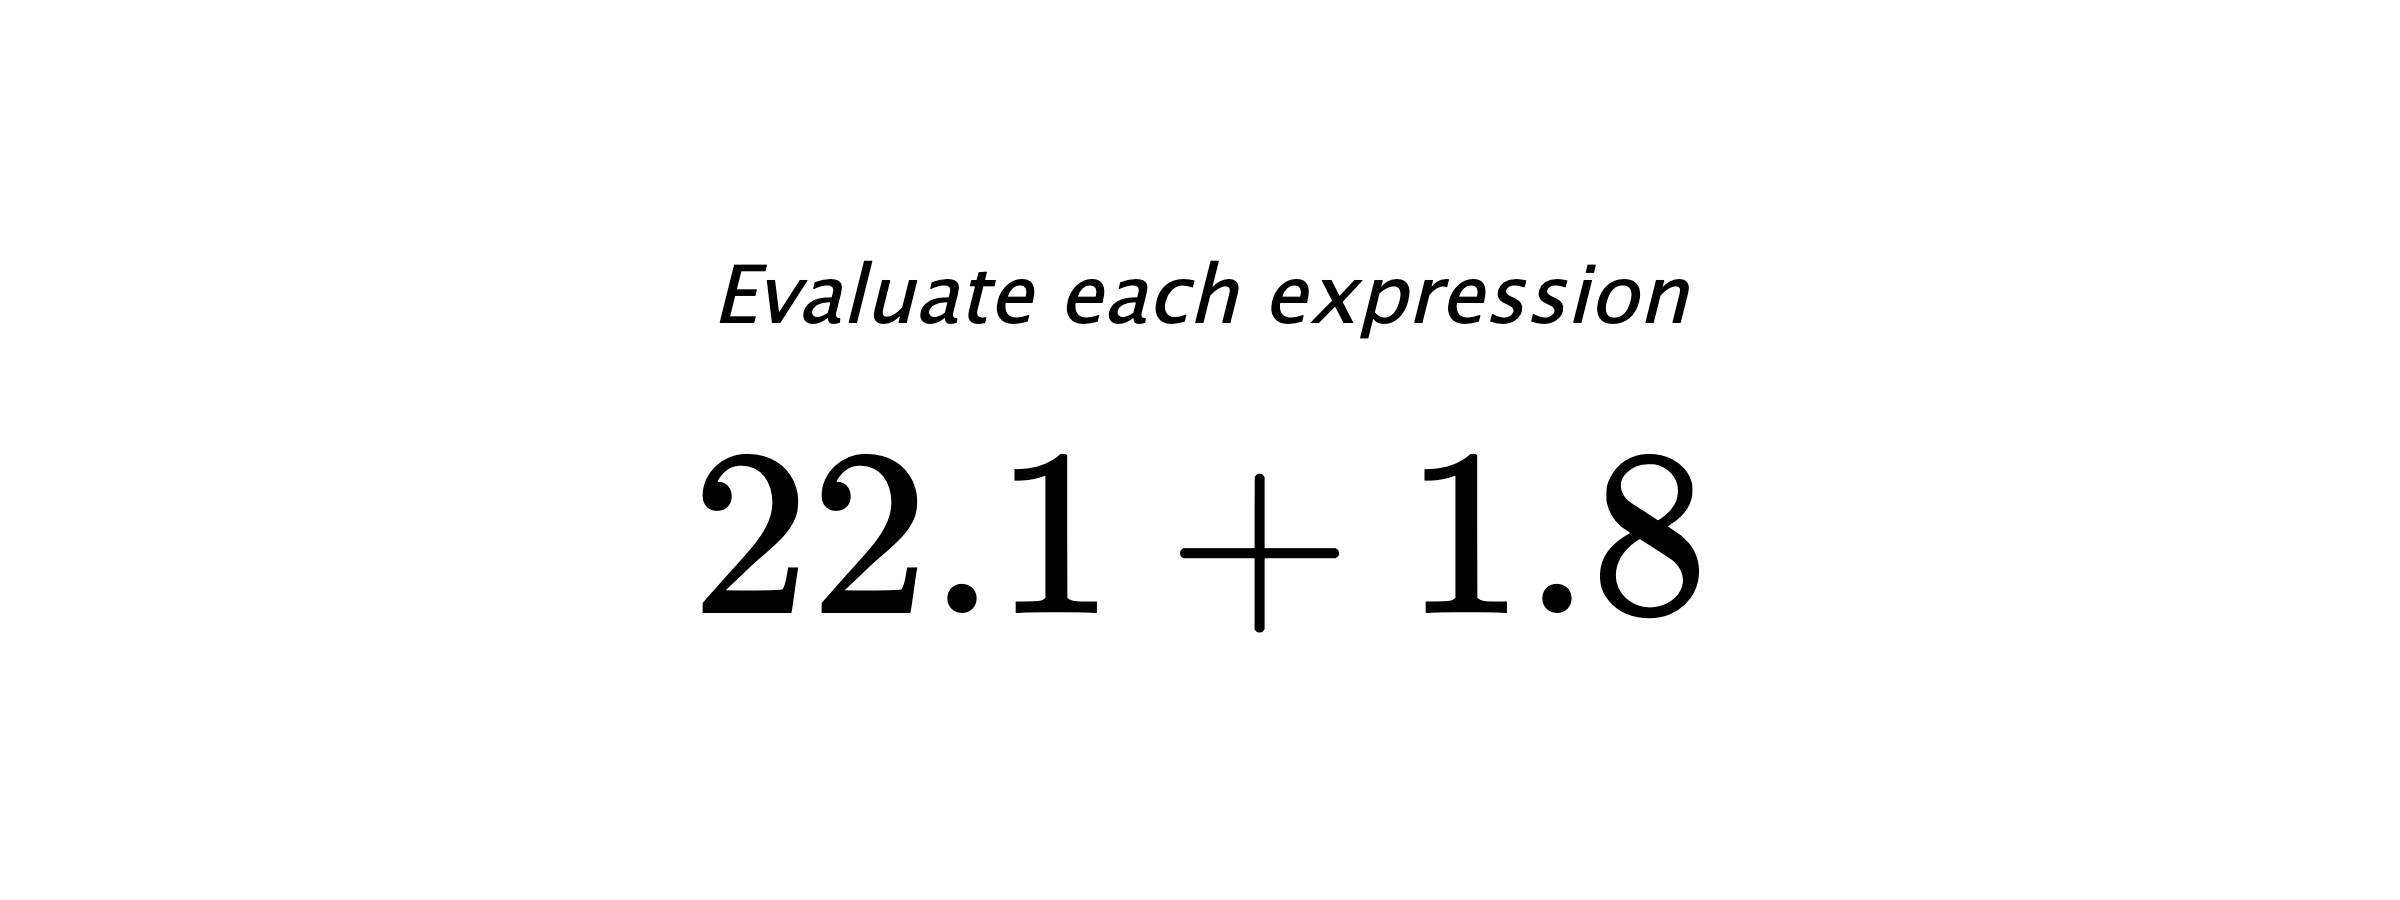 Evaluate each expression $ 22.1+1.8 $